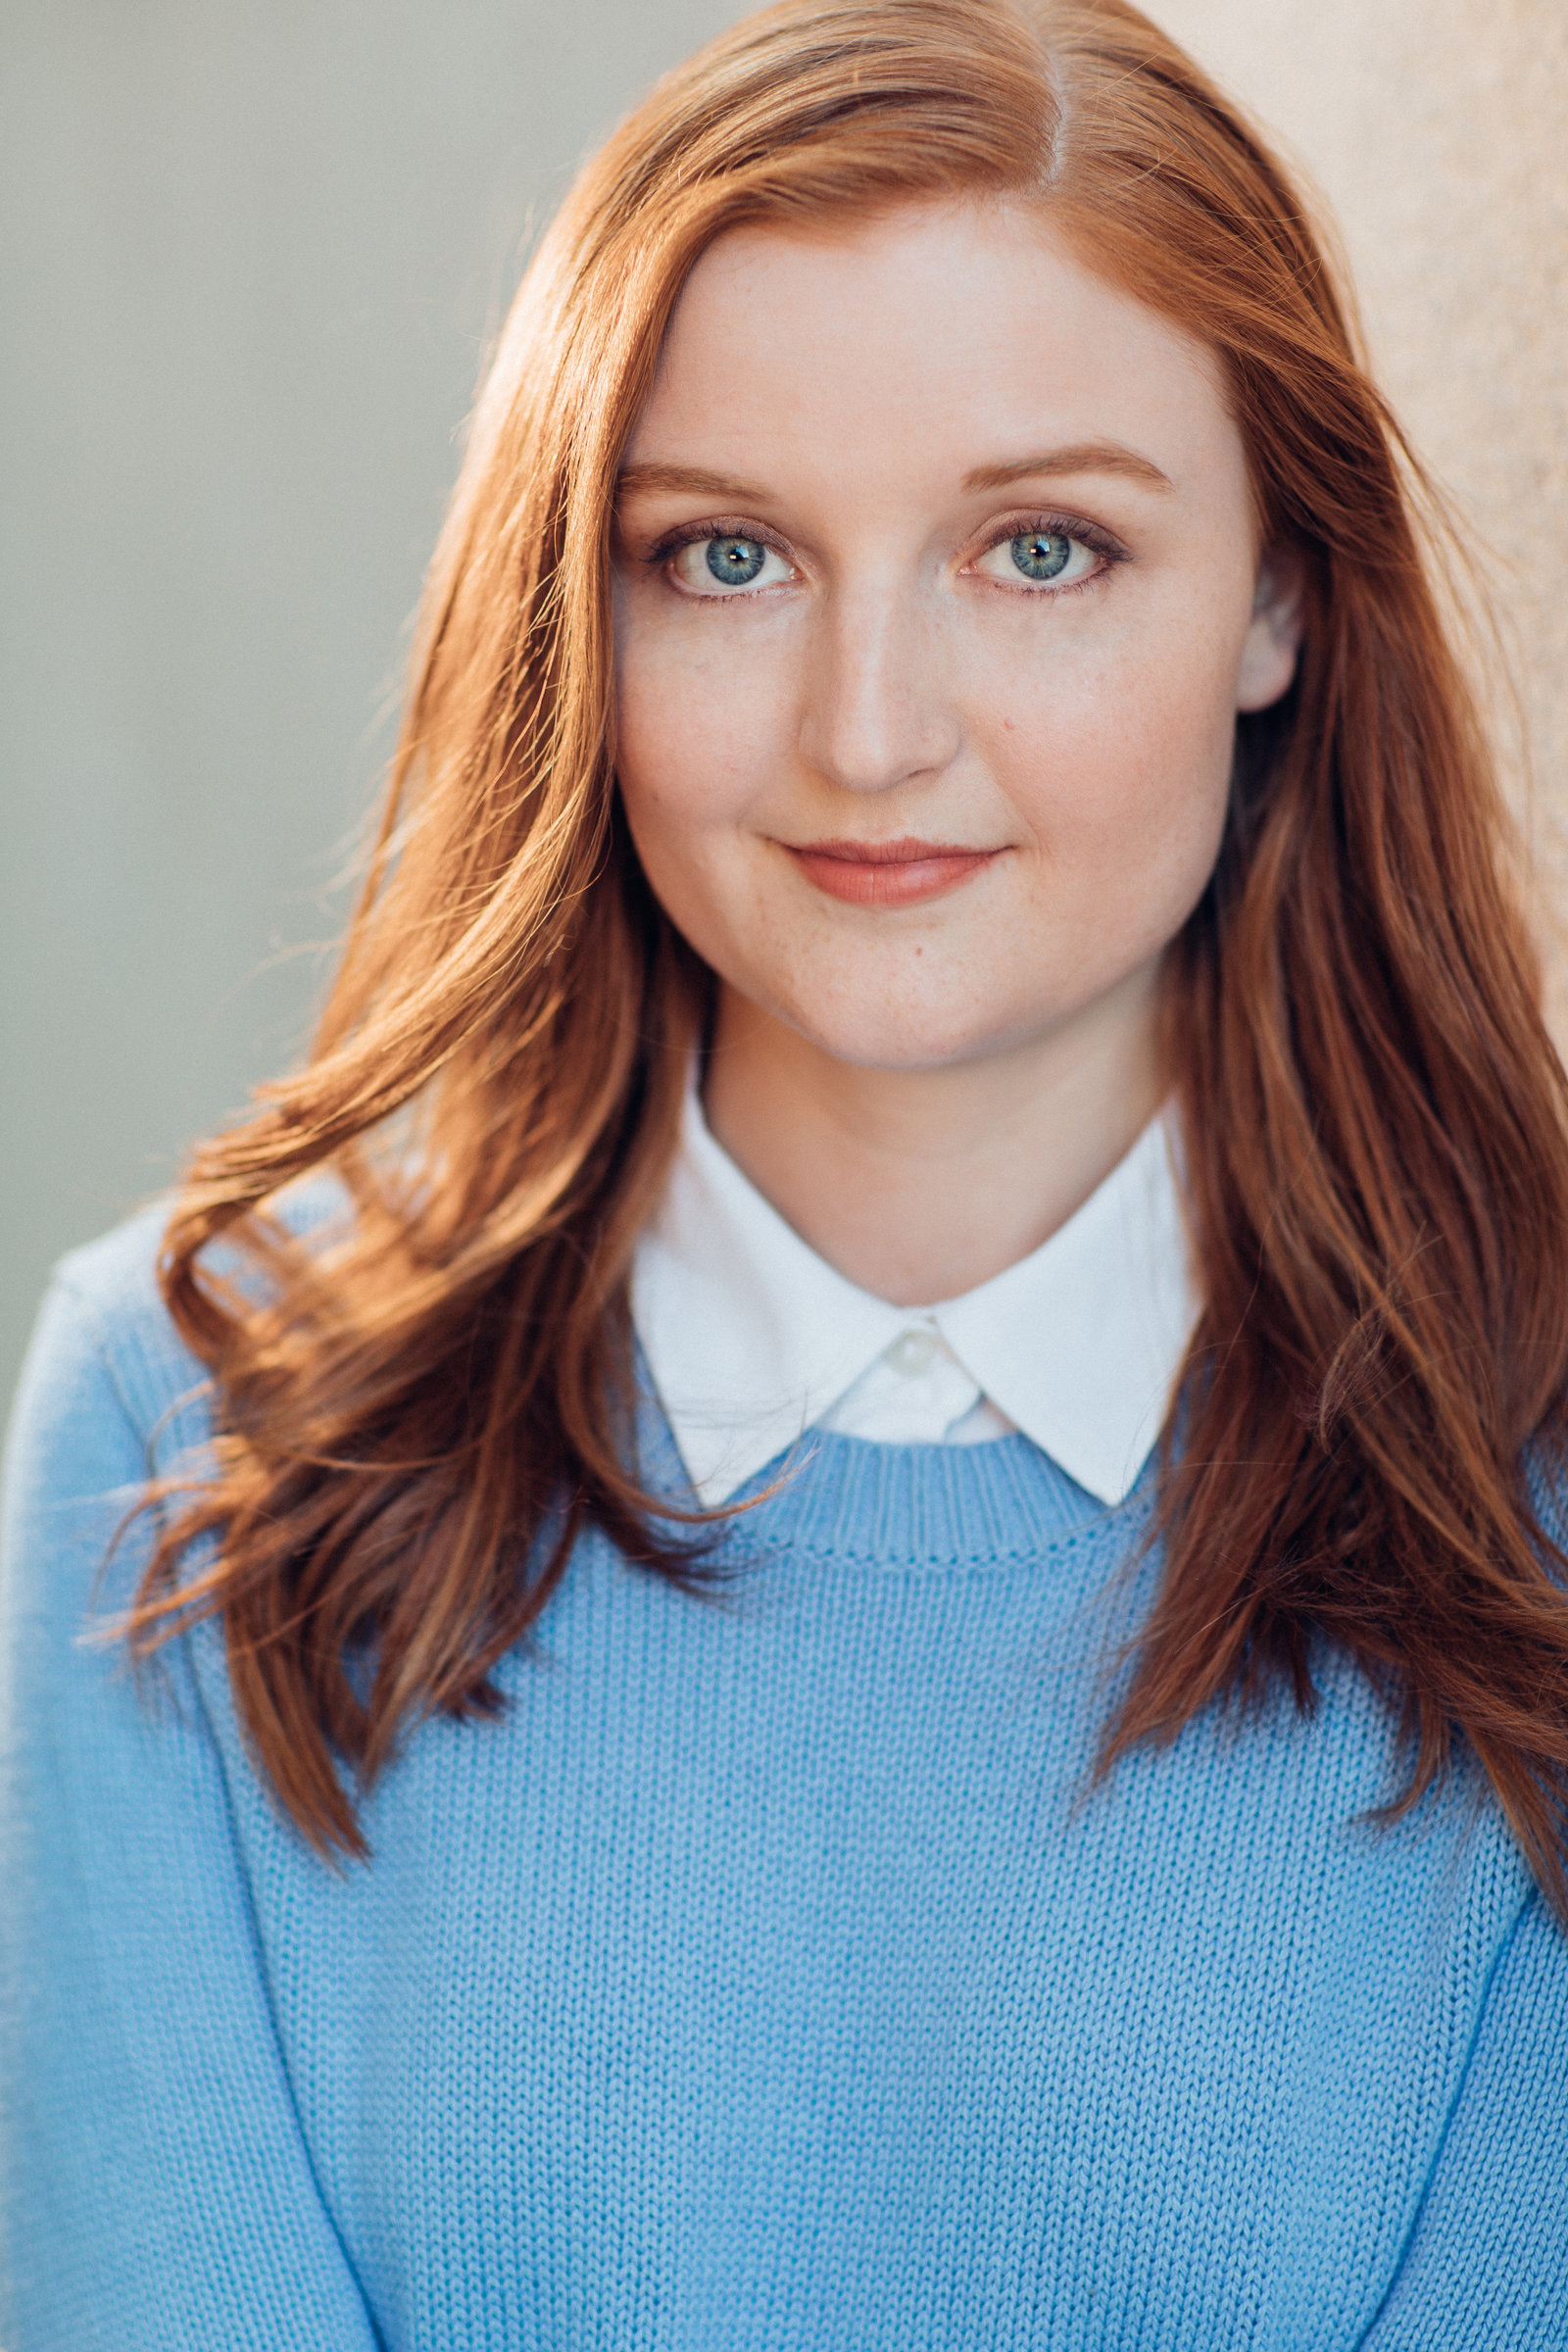 Headshot Photo Of Young Woman In Light Blue Sweater